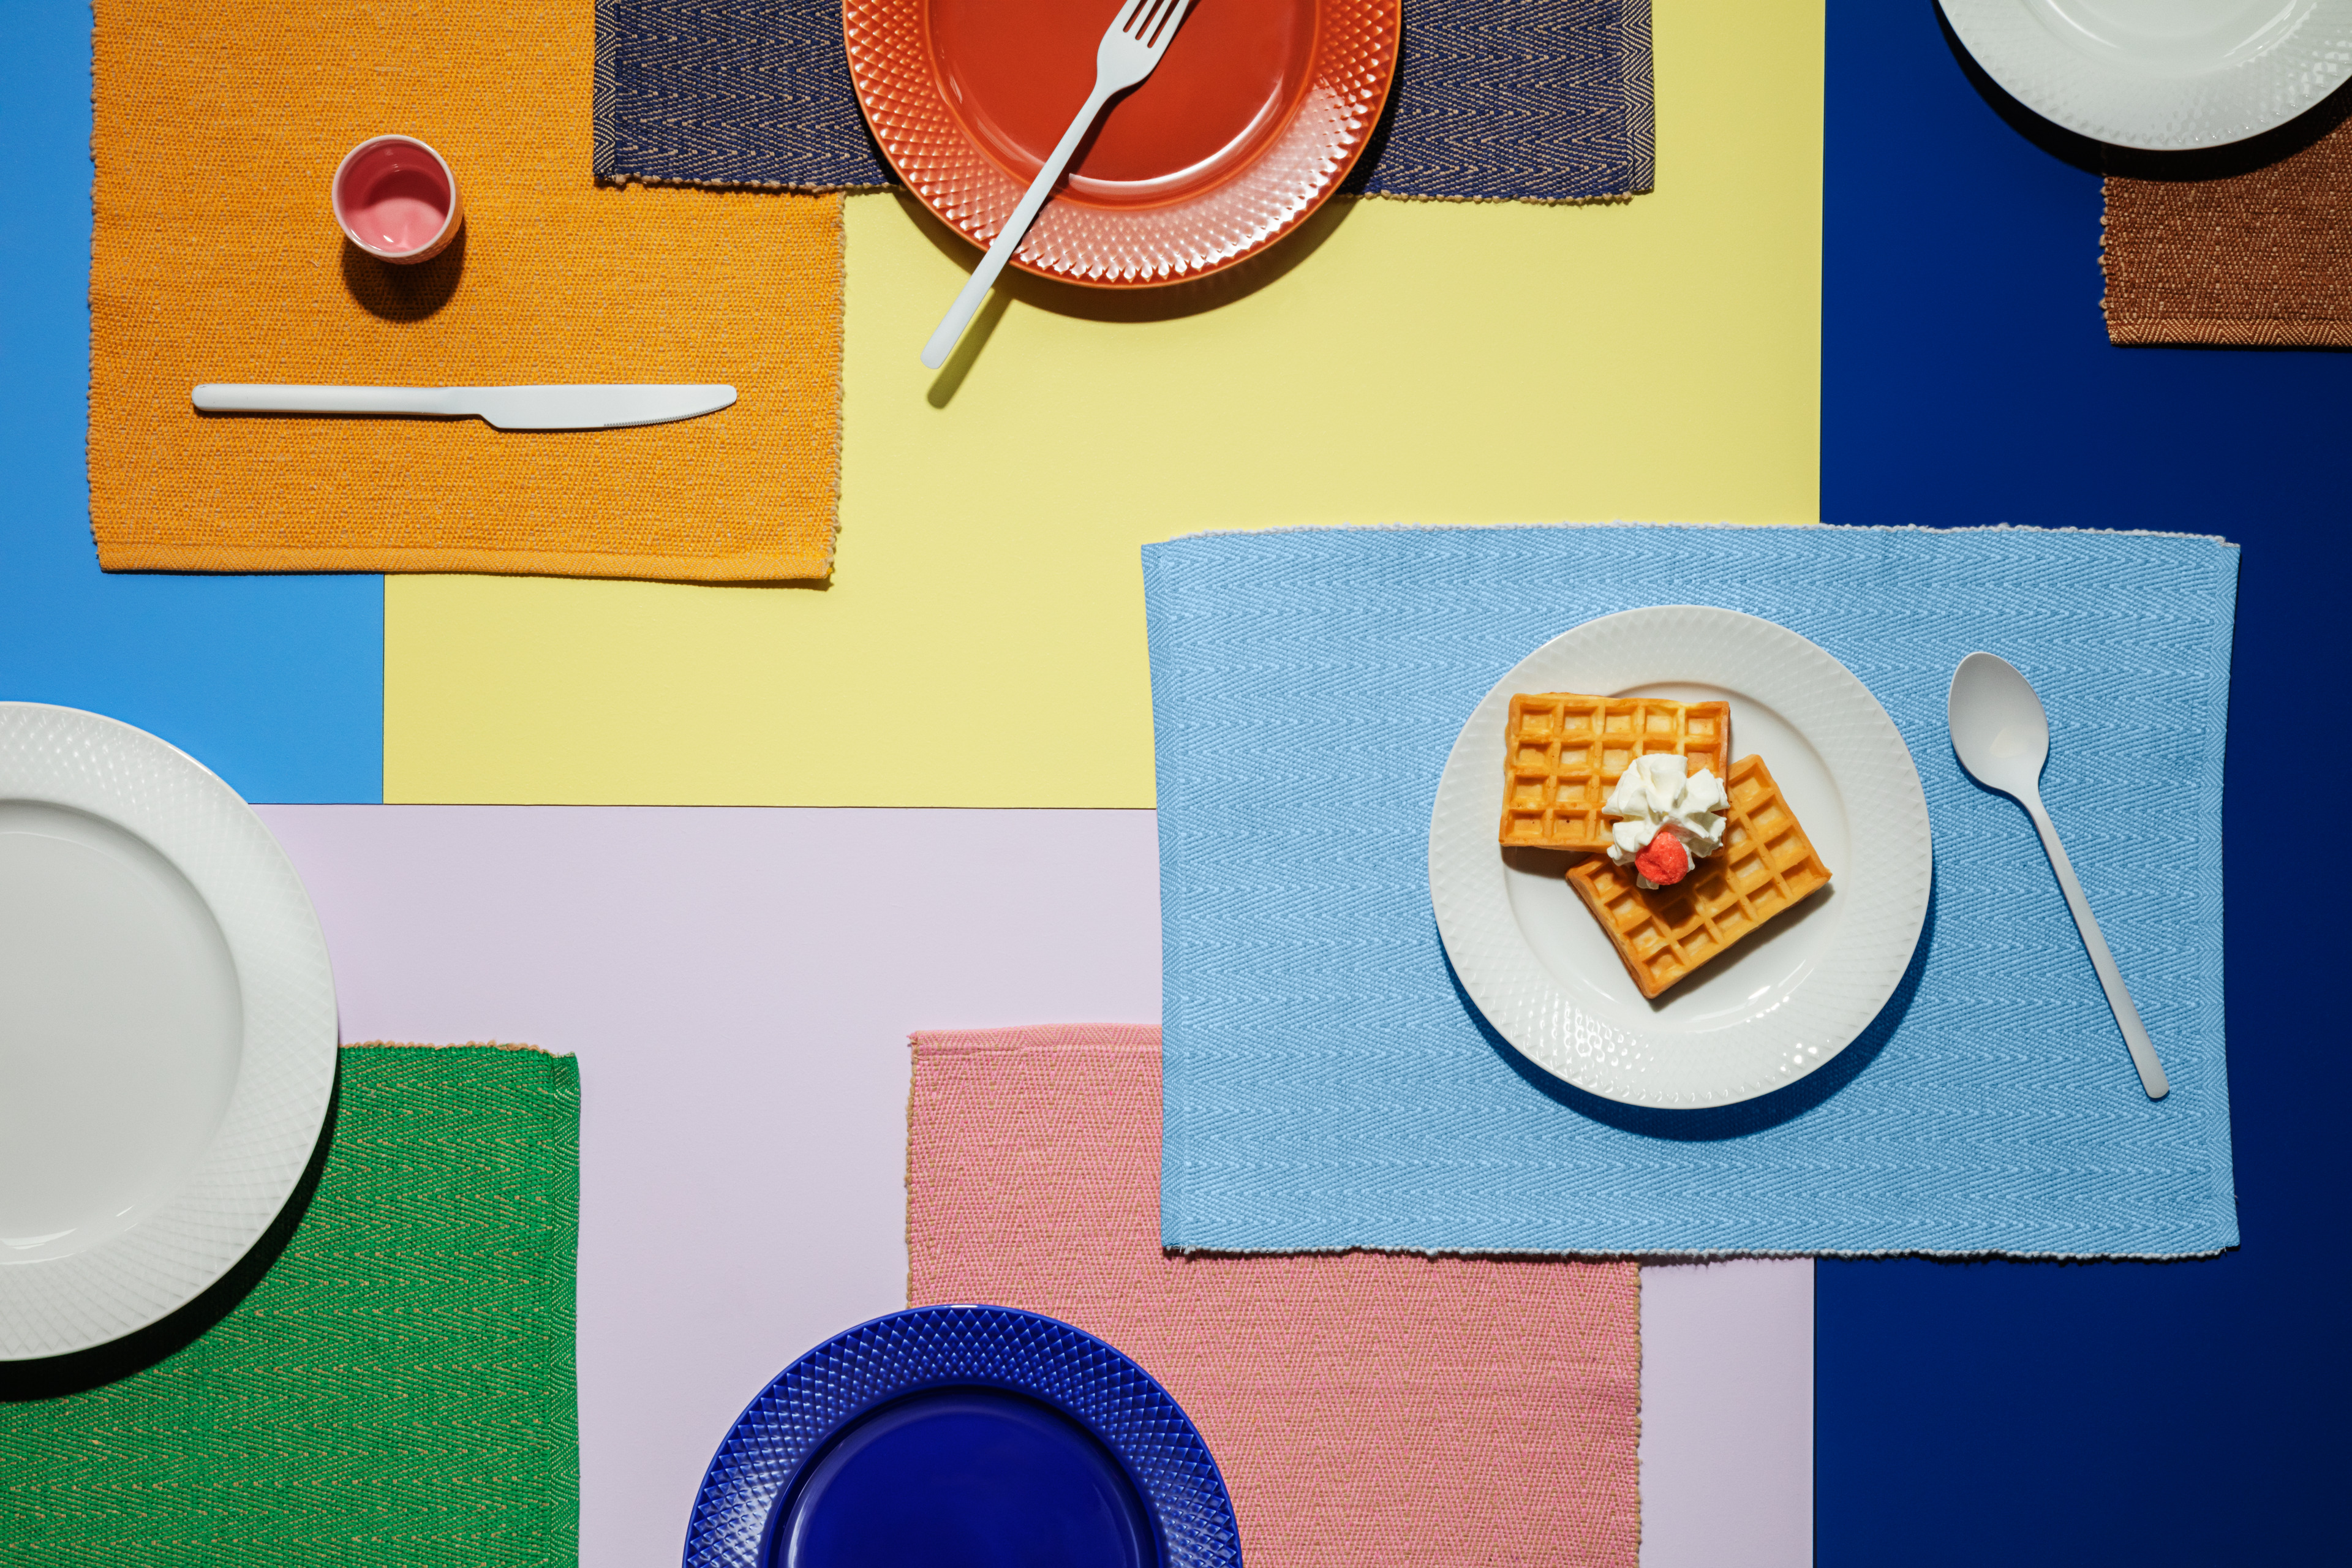 The placemat and cloth napkin from the Lyngby Porcelain Herringbone series